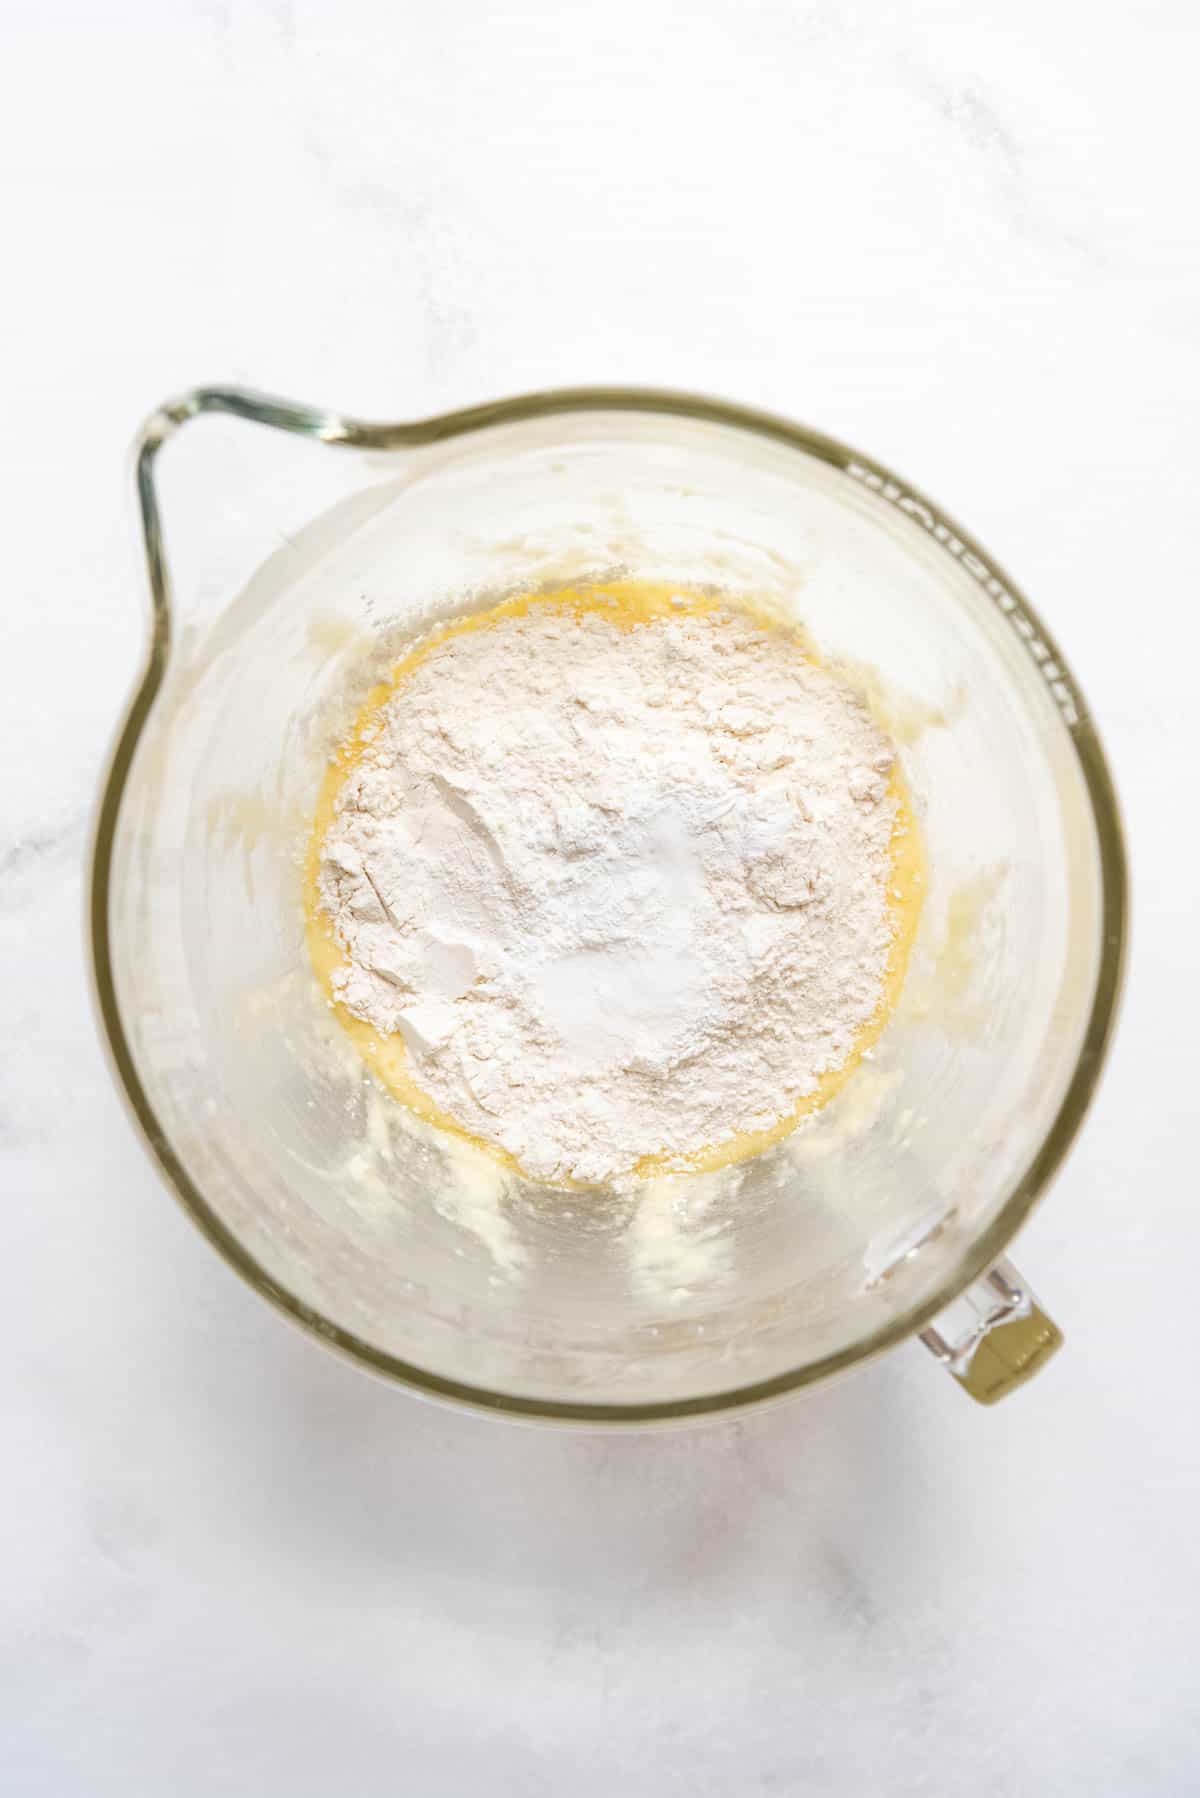 Top view of a glass mixing jug with a flour mixture on top.